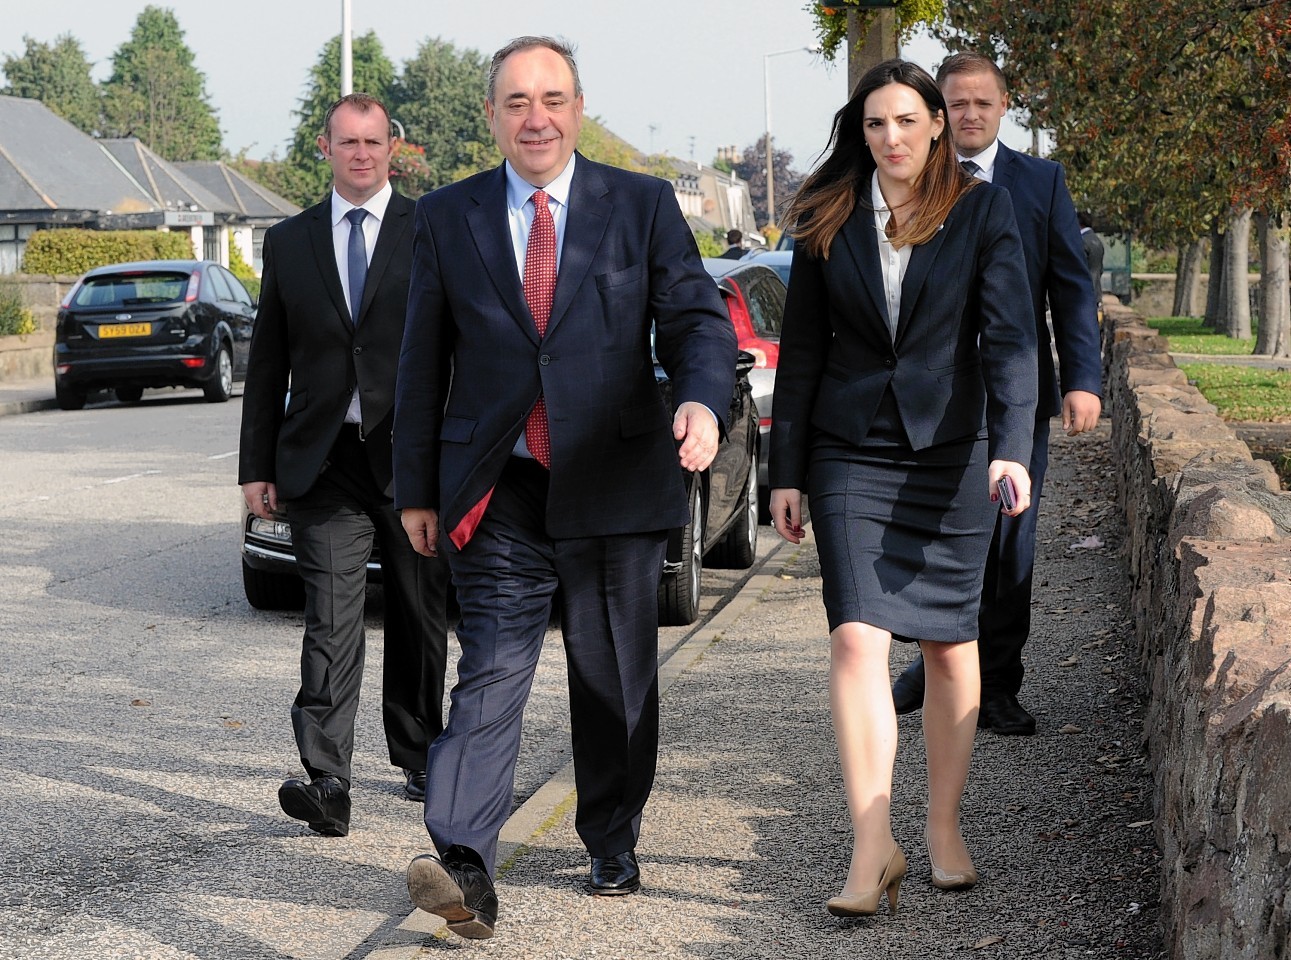 Alex Salmond on the campaign trail in Dyce